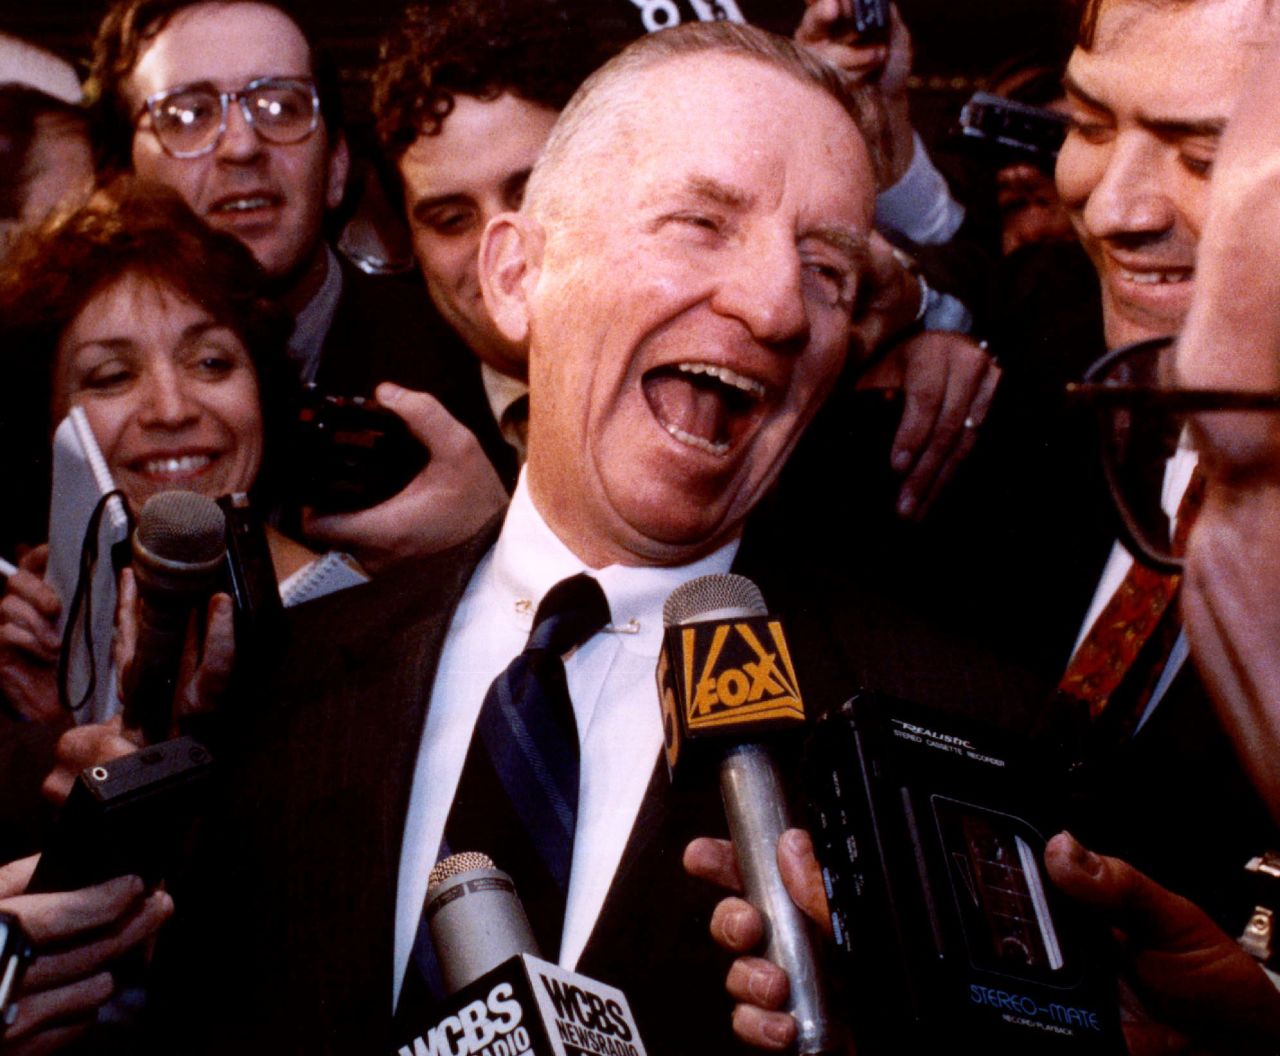 Perot laughs while talking to reporters in New York in May 1992. Perot was asked when he formally planned to enter the presidential race. He said "watch my lips" — a jab at President George H.W. Bush.